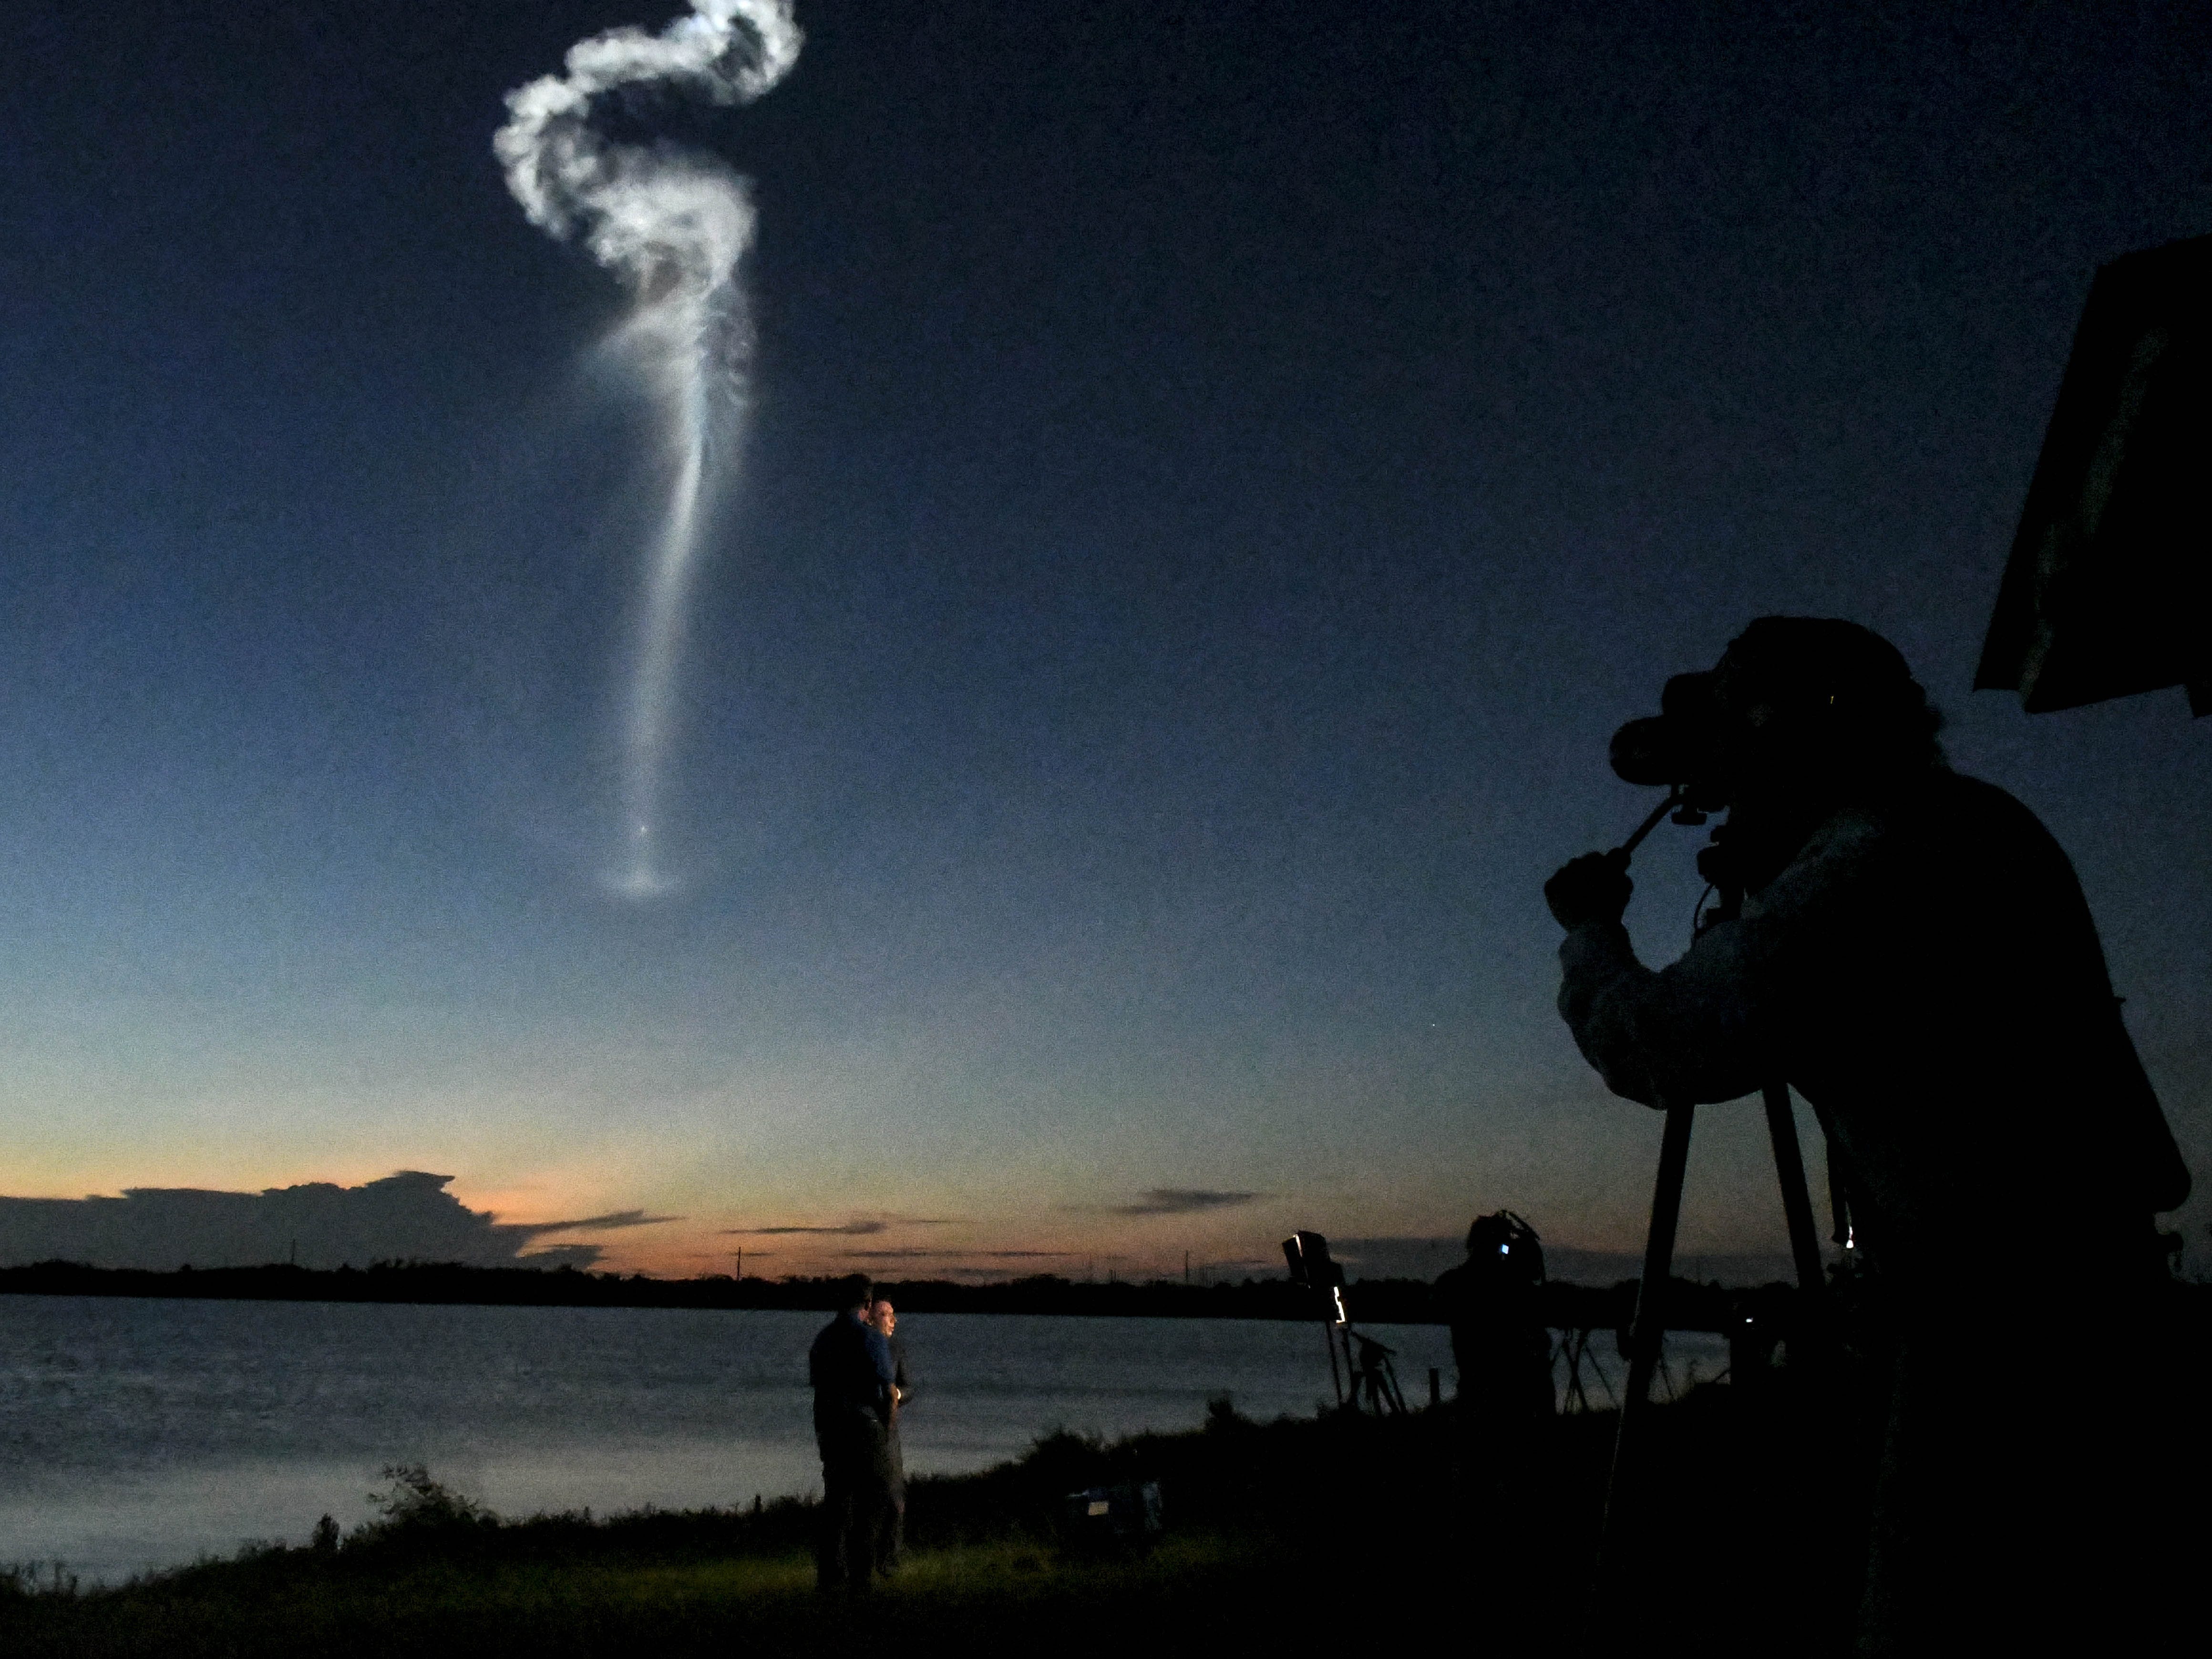 A United Launch Alliance Atlas V rocket lifts off from Cape Canaveral Air Force Station early Thursday morning, Aug. 8, 2019. The rocket is carrying the AEHF 5 communications satellite for the U.S. military.